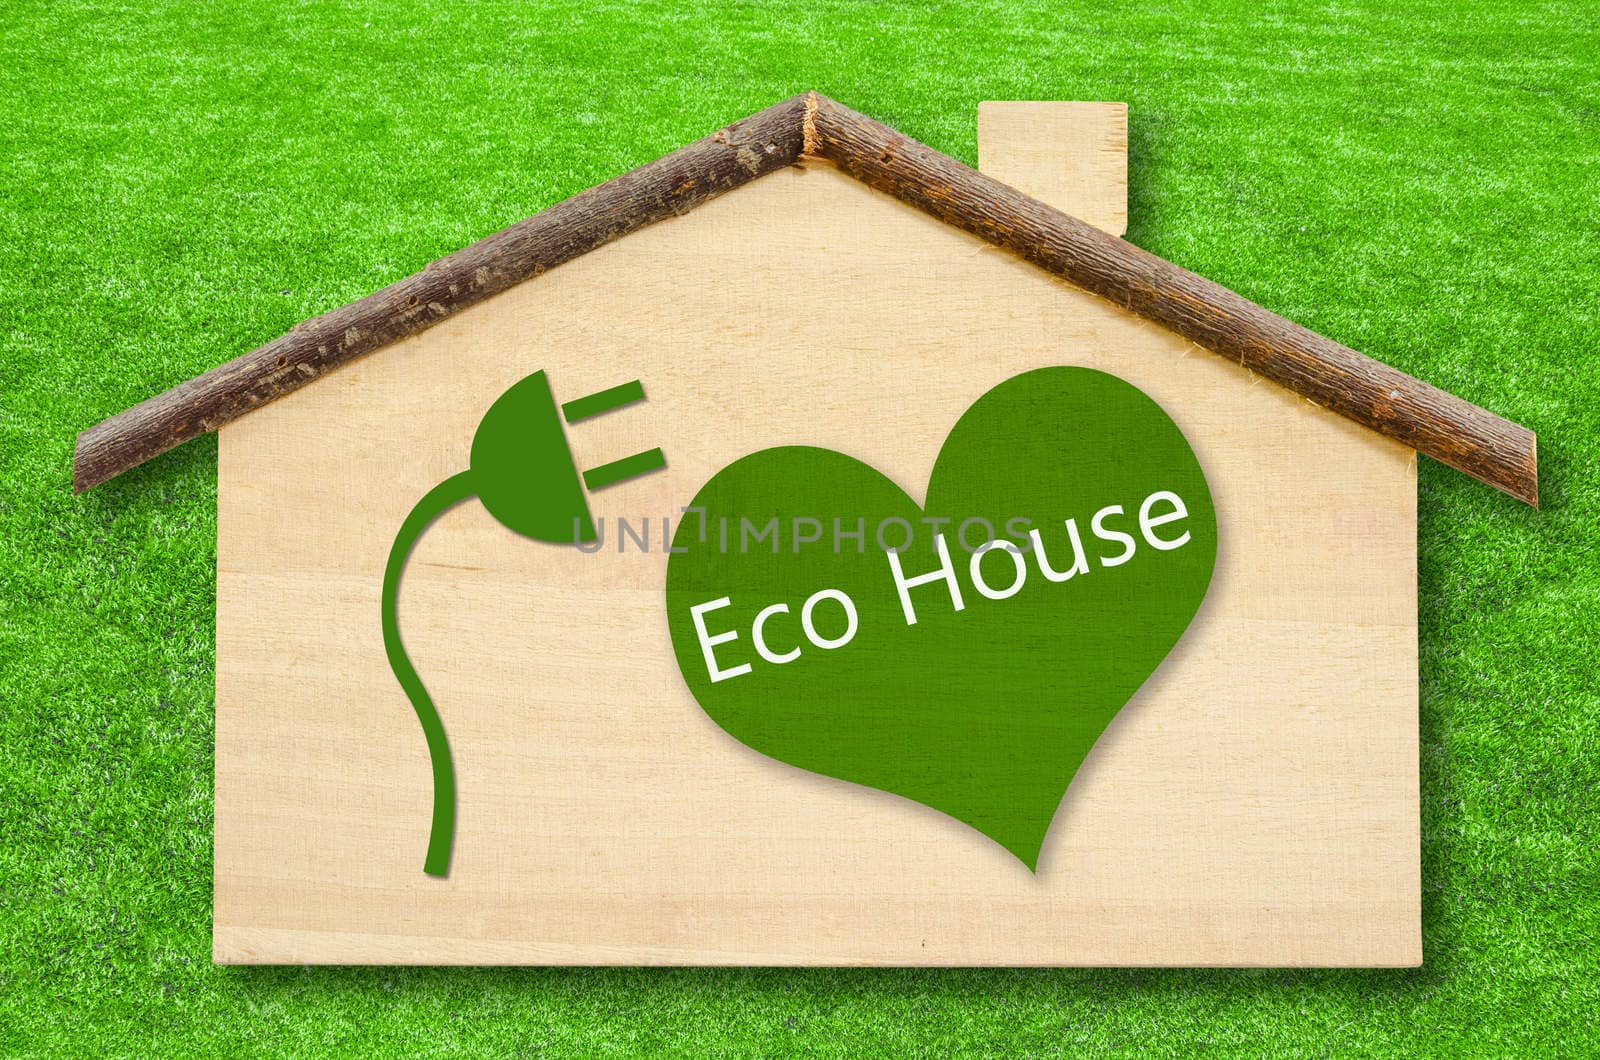 Eco house on Little home wooden model on green grass background. Save clipping path